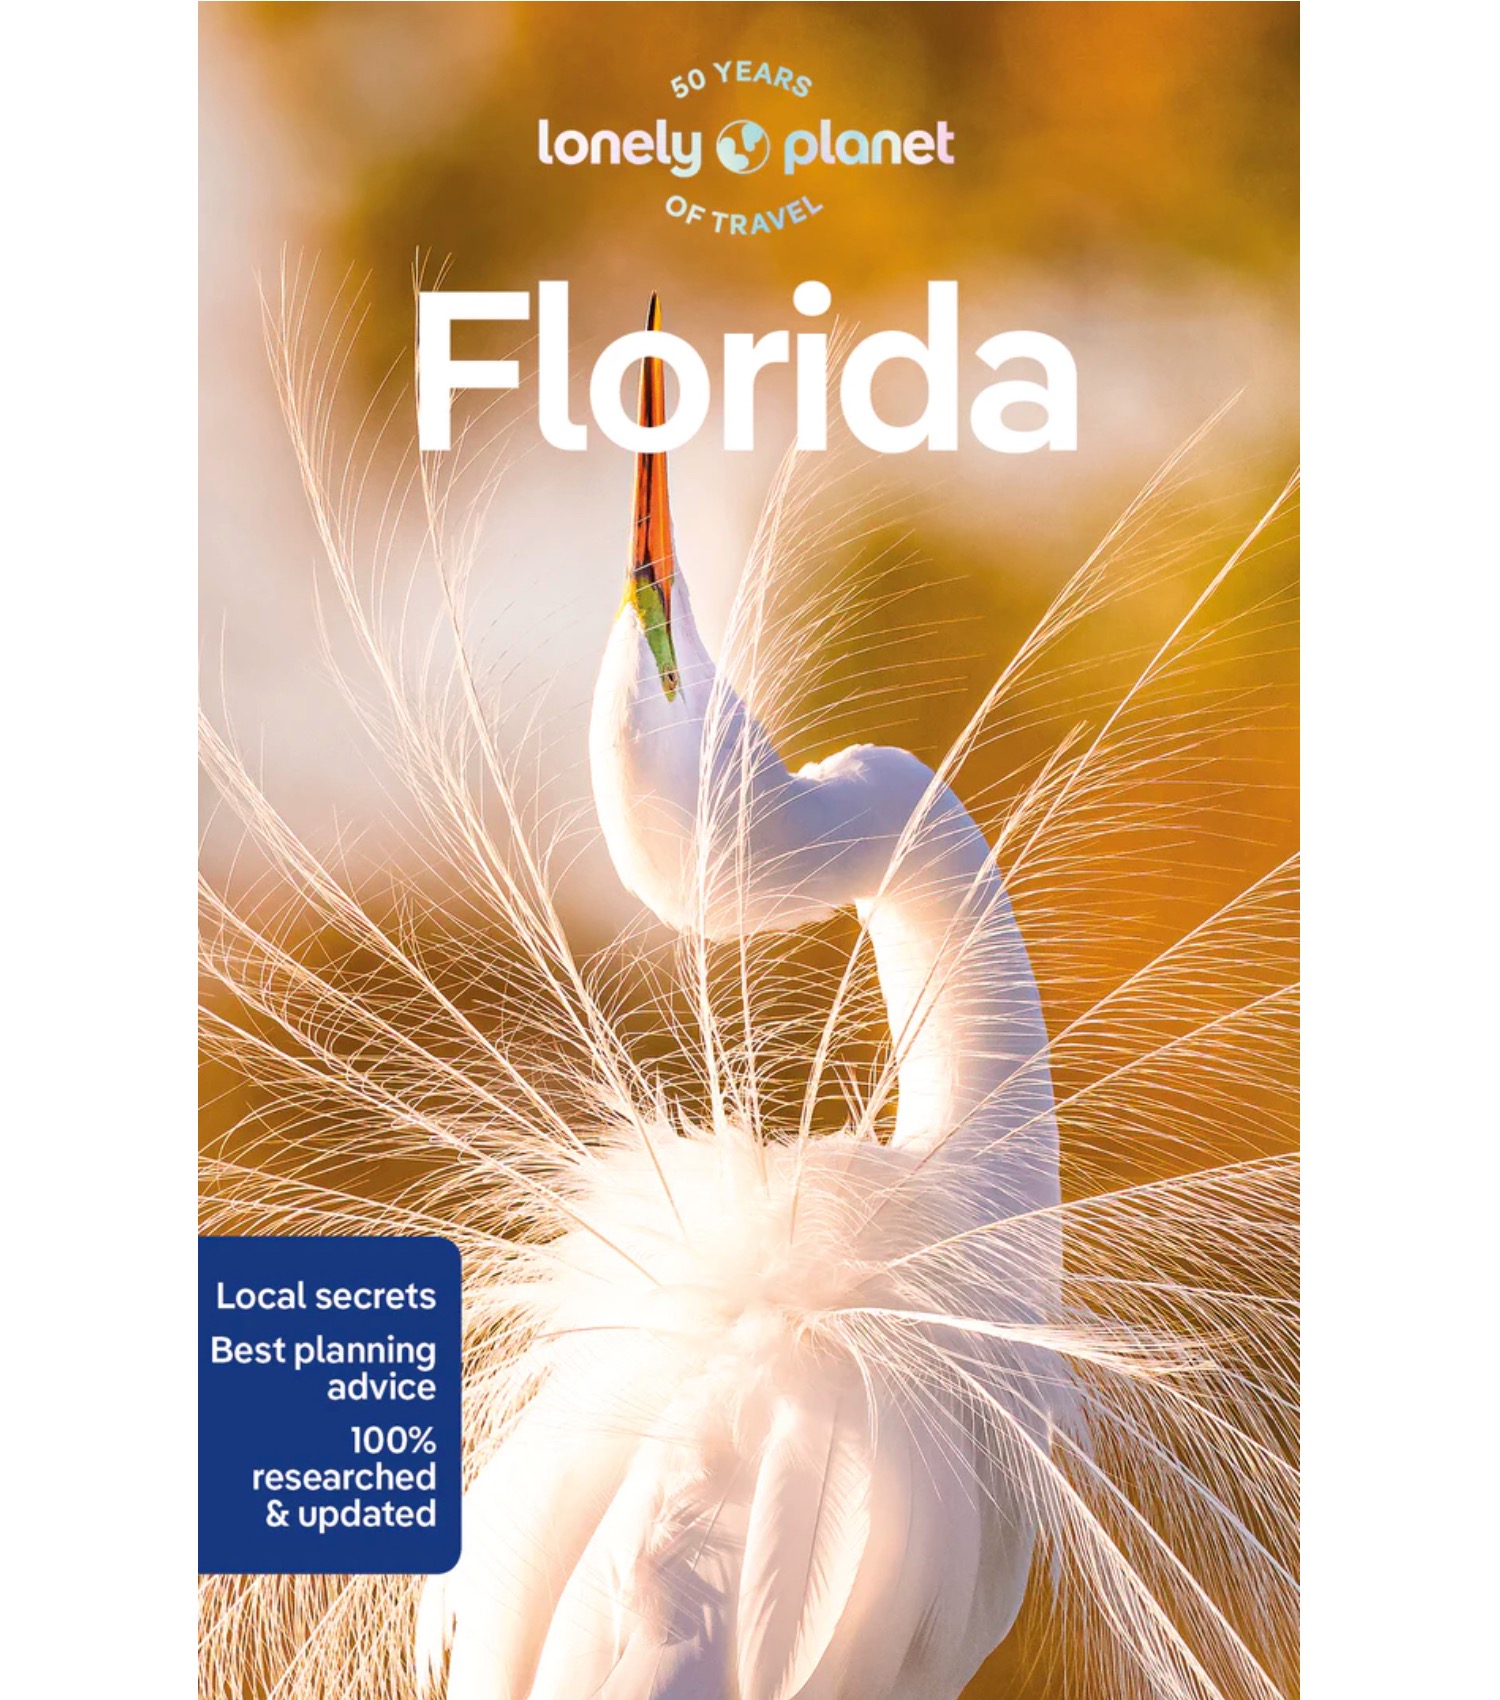 Florida　Lonely　Planet　10　(9781838697785)　Planet　Lonely　Edition　by